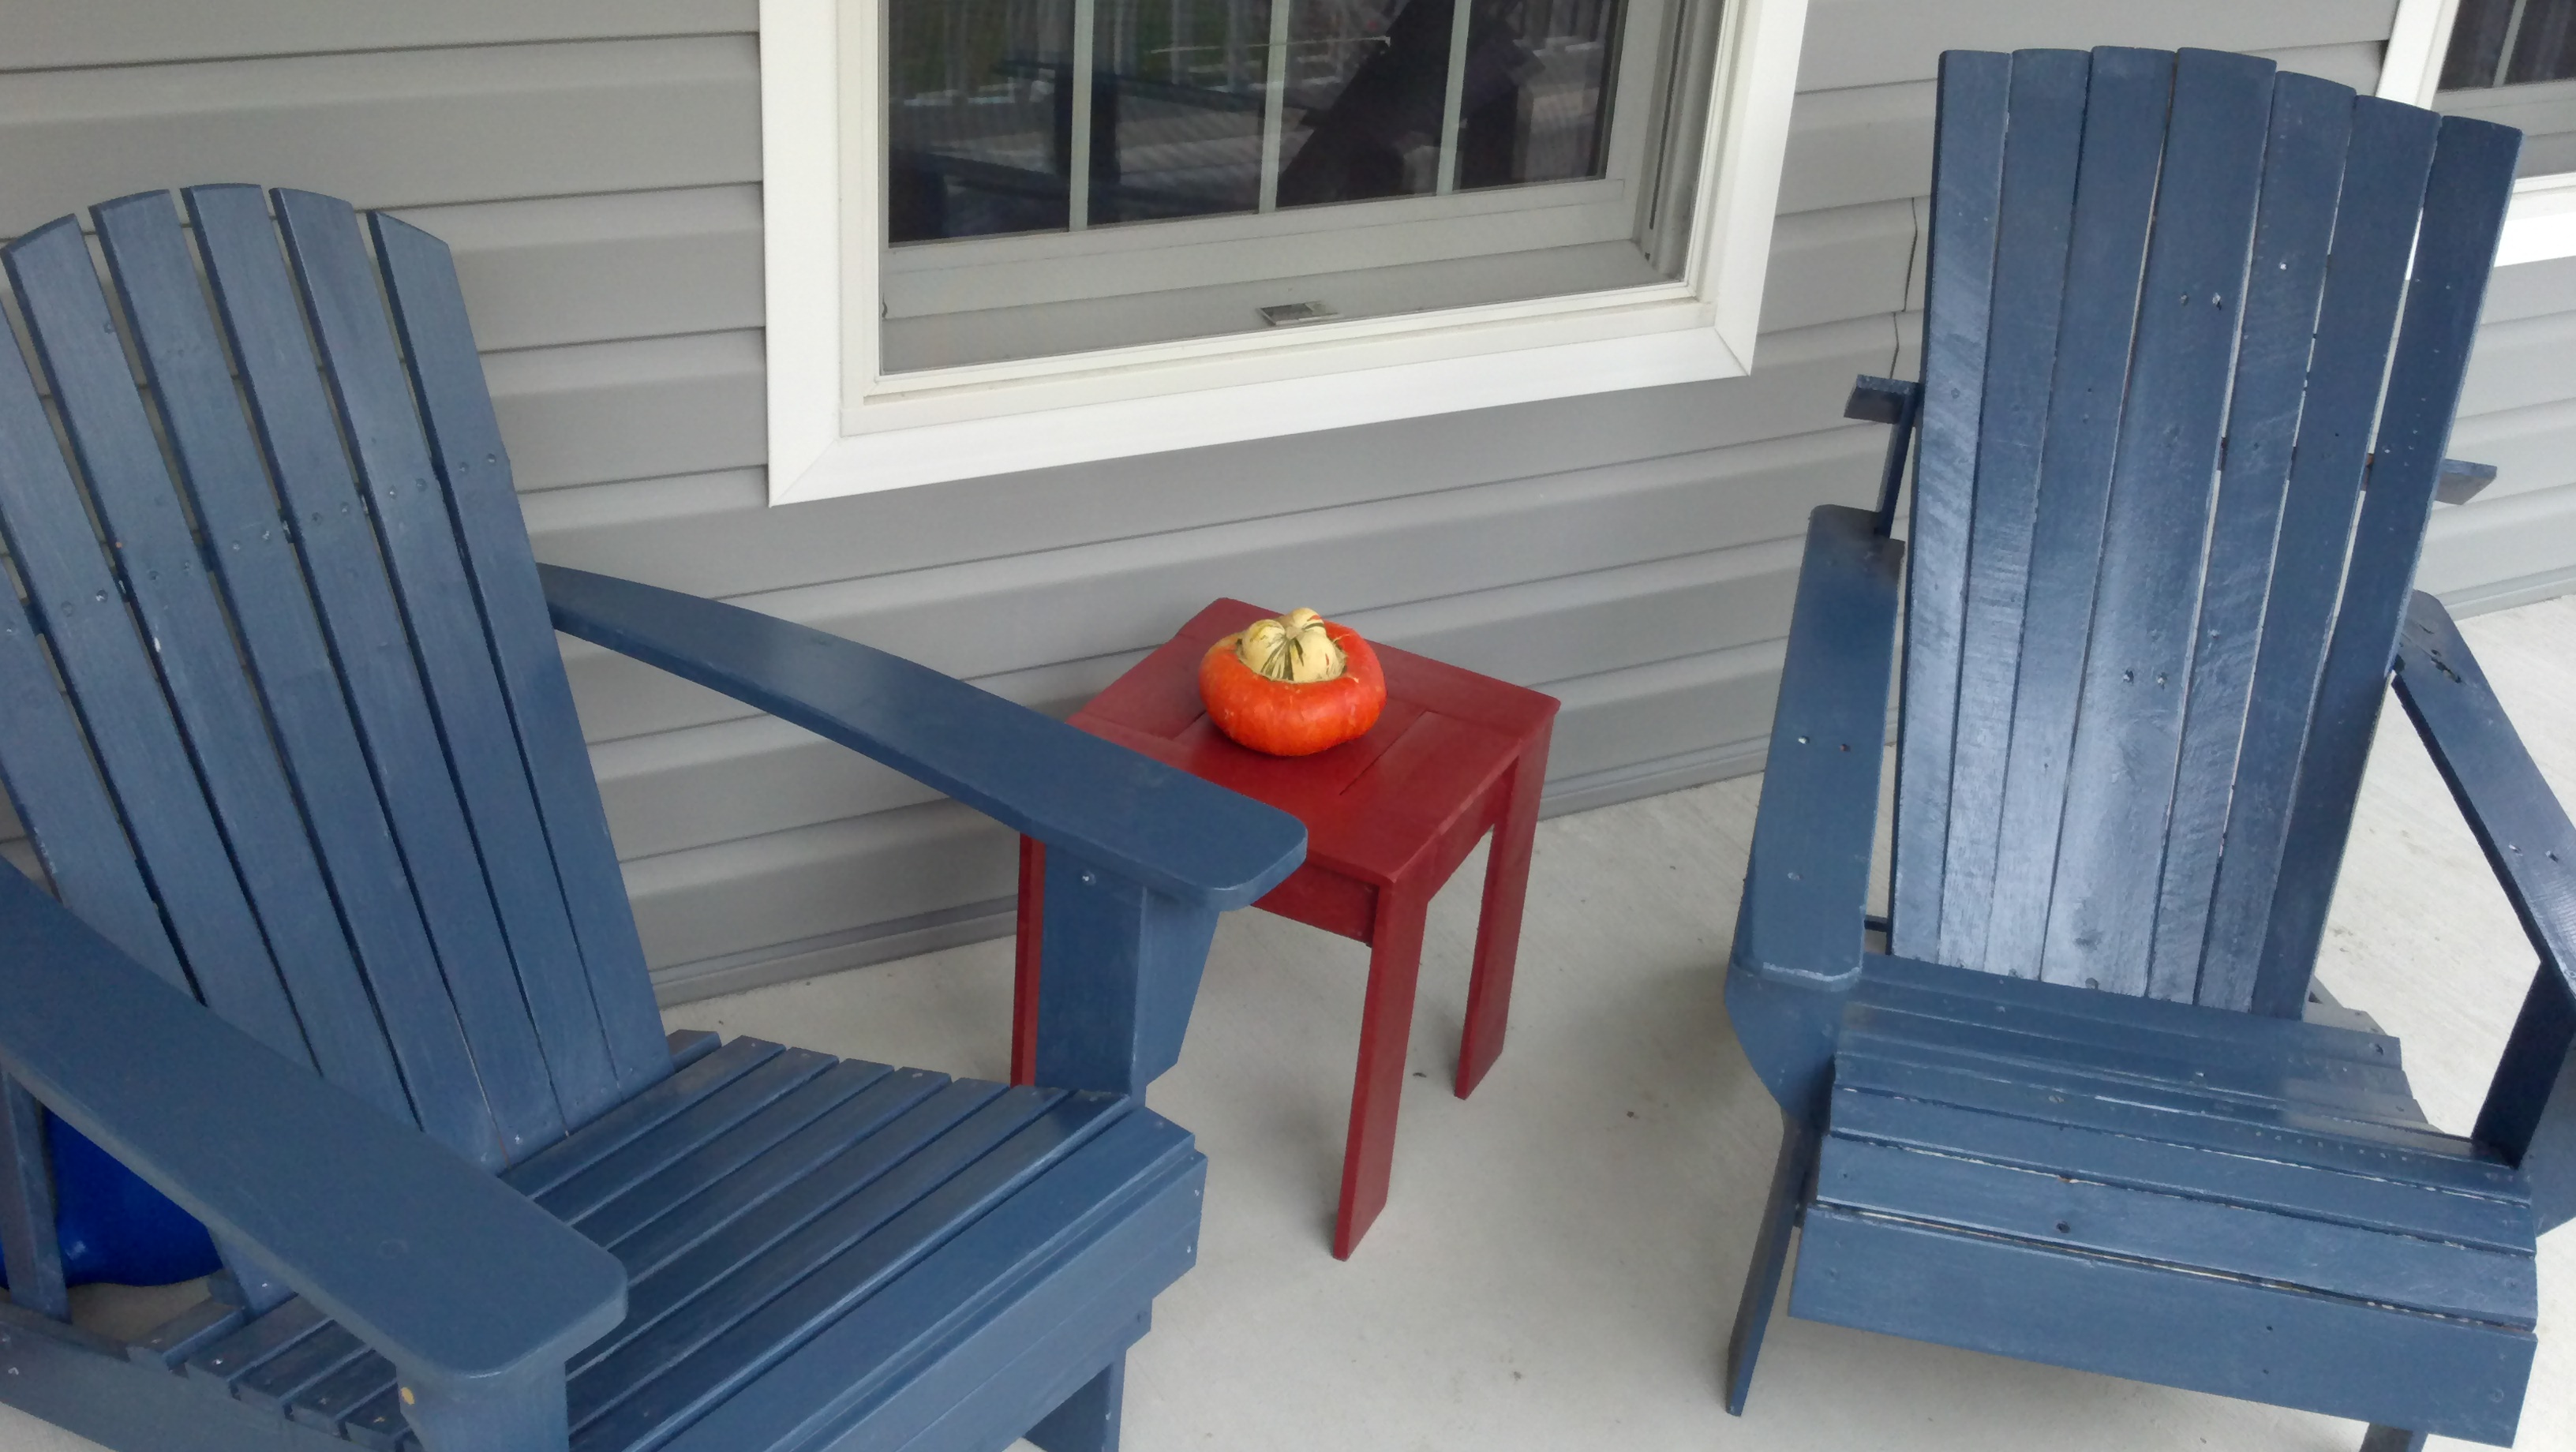 Woodworking diy adirondack chair made from pallets PDF Free Download